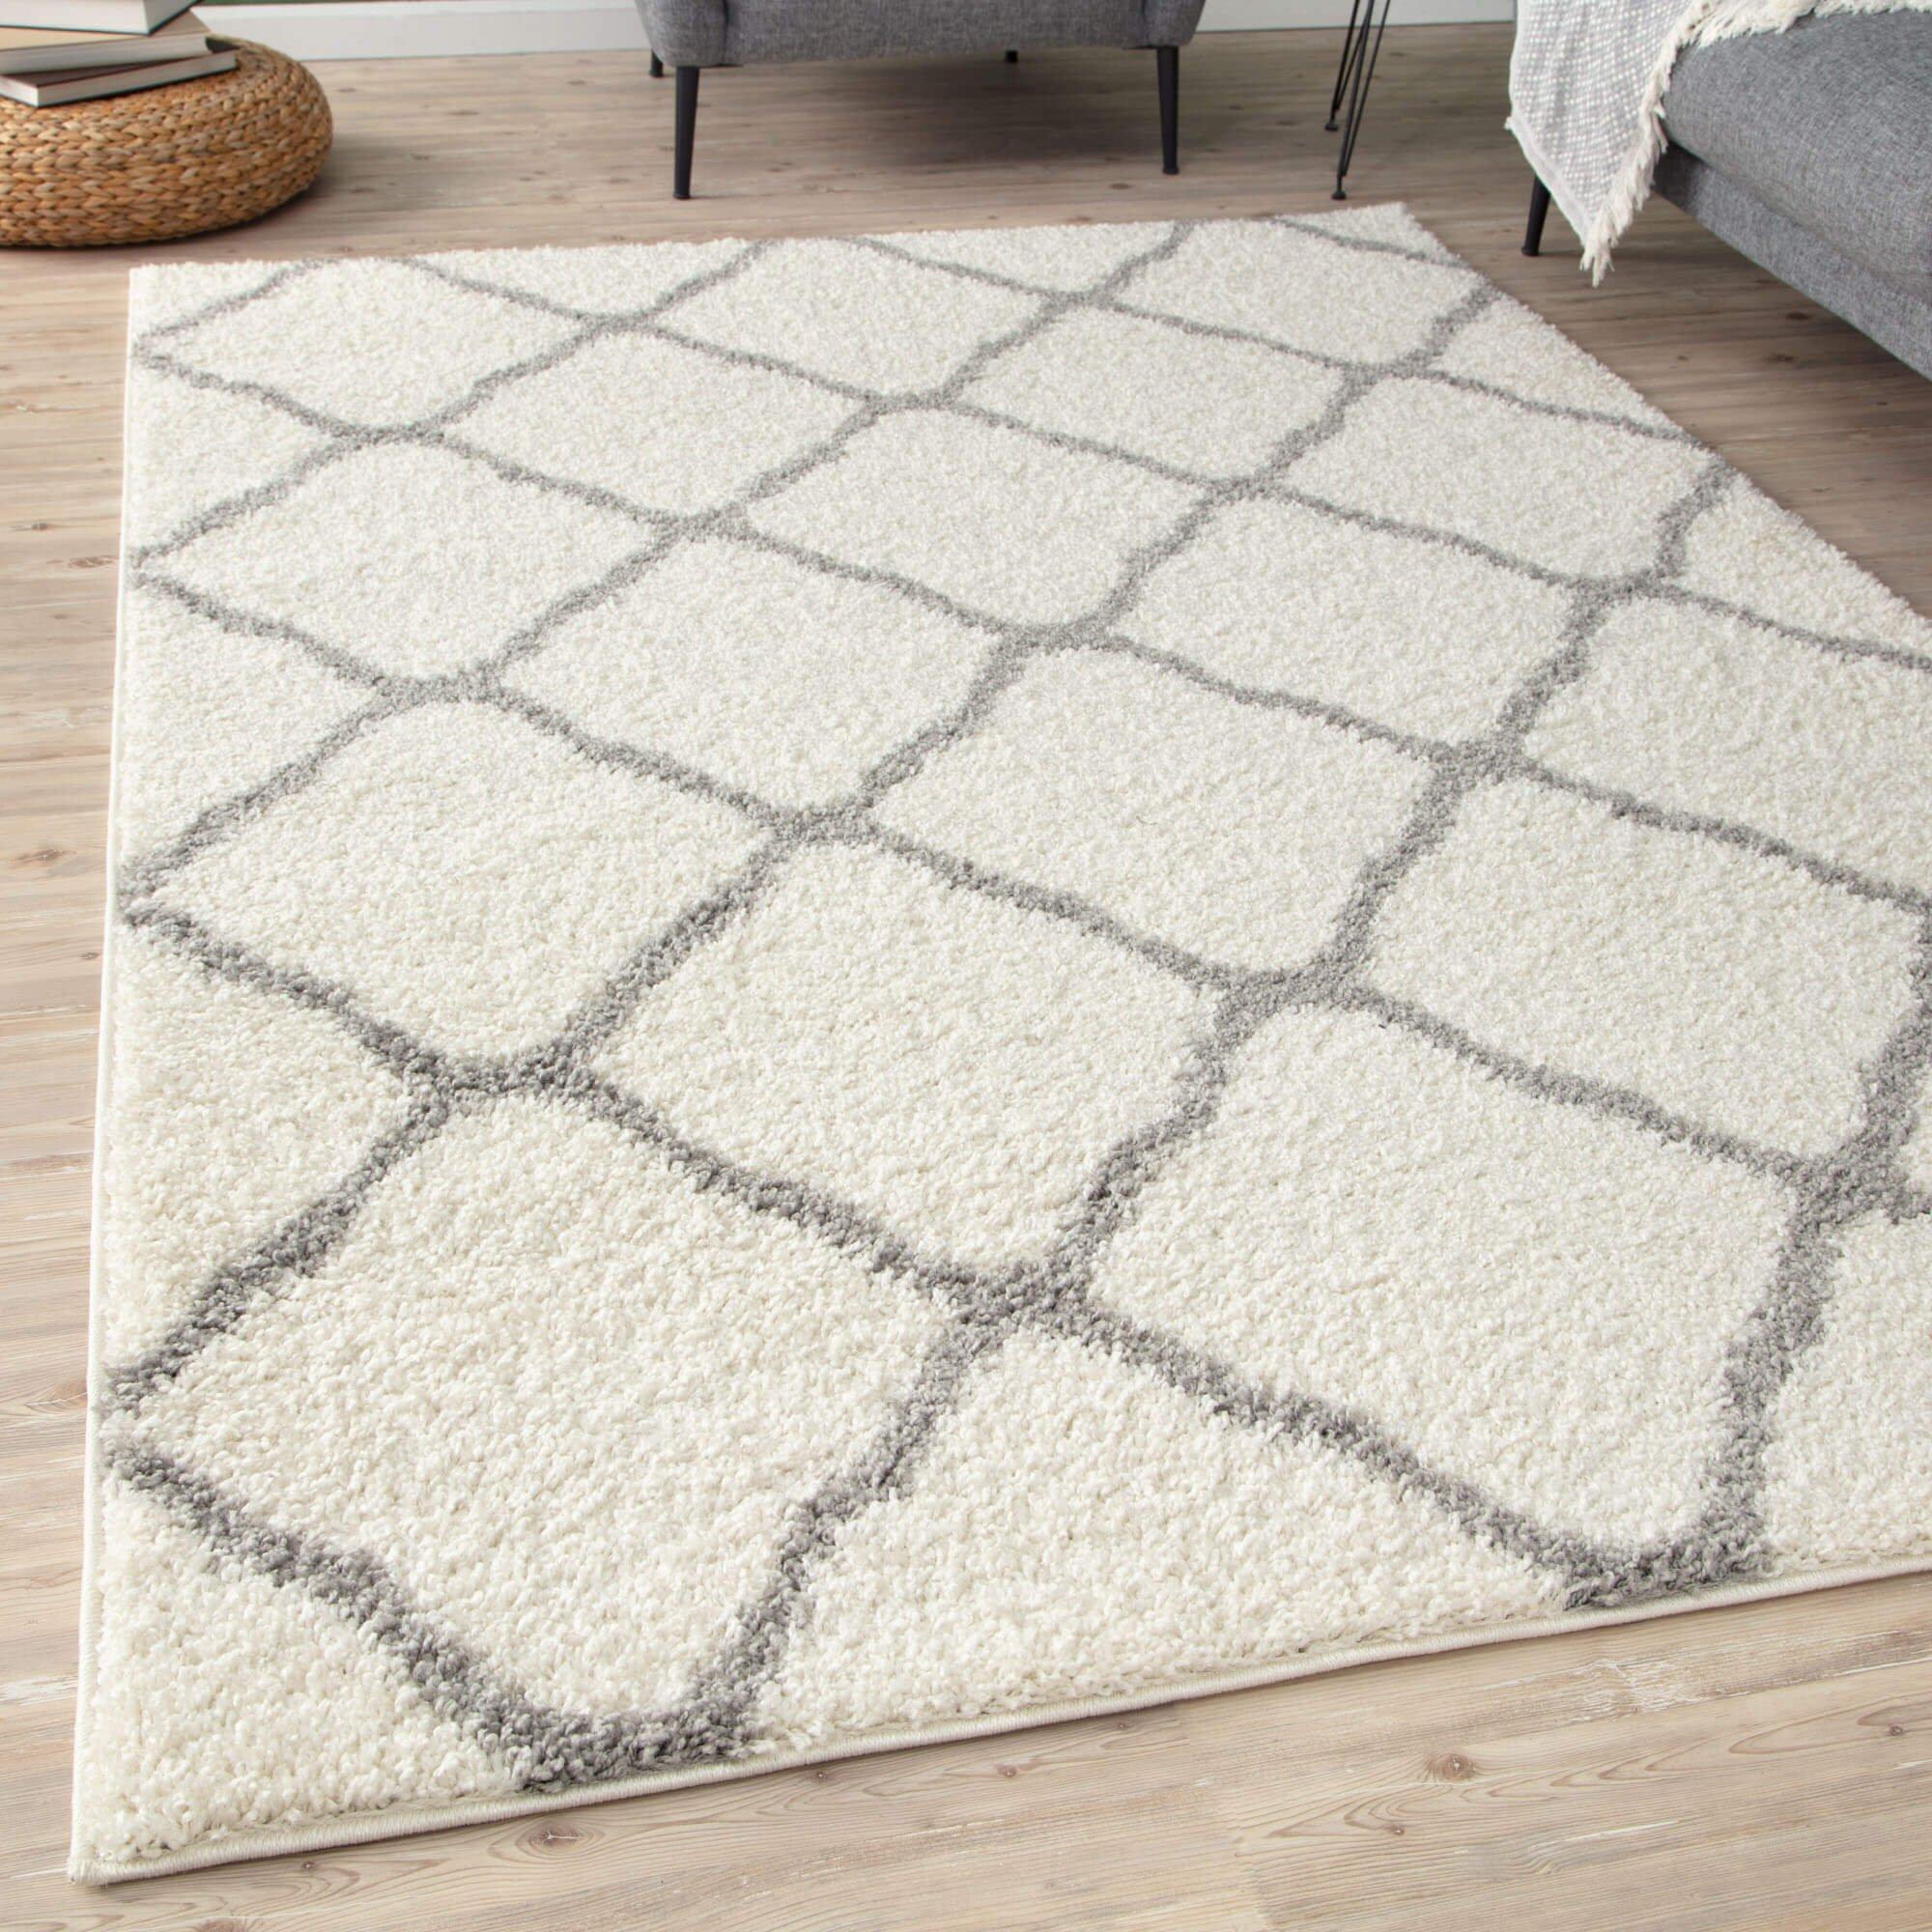 Myshaggy Collection Rugs Moroccan Design in Ivory- 385 IG